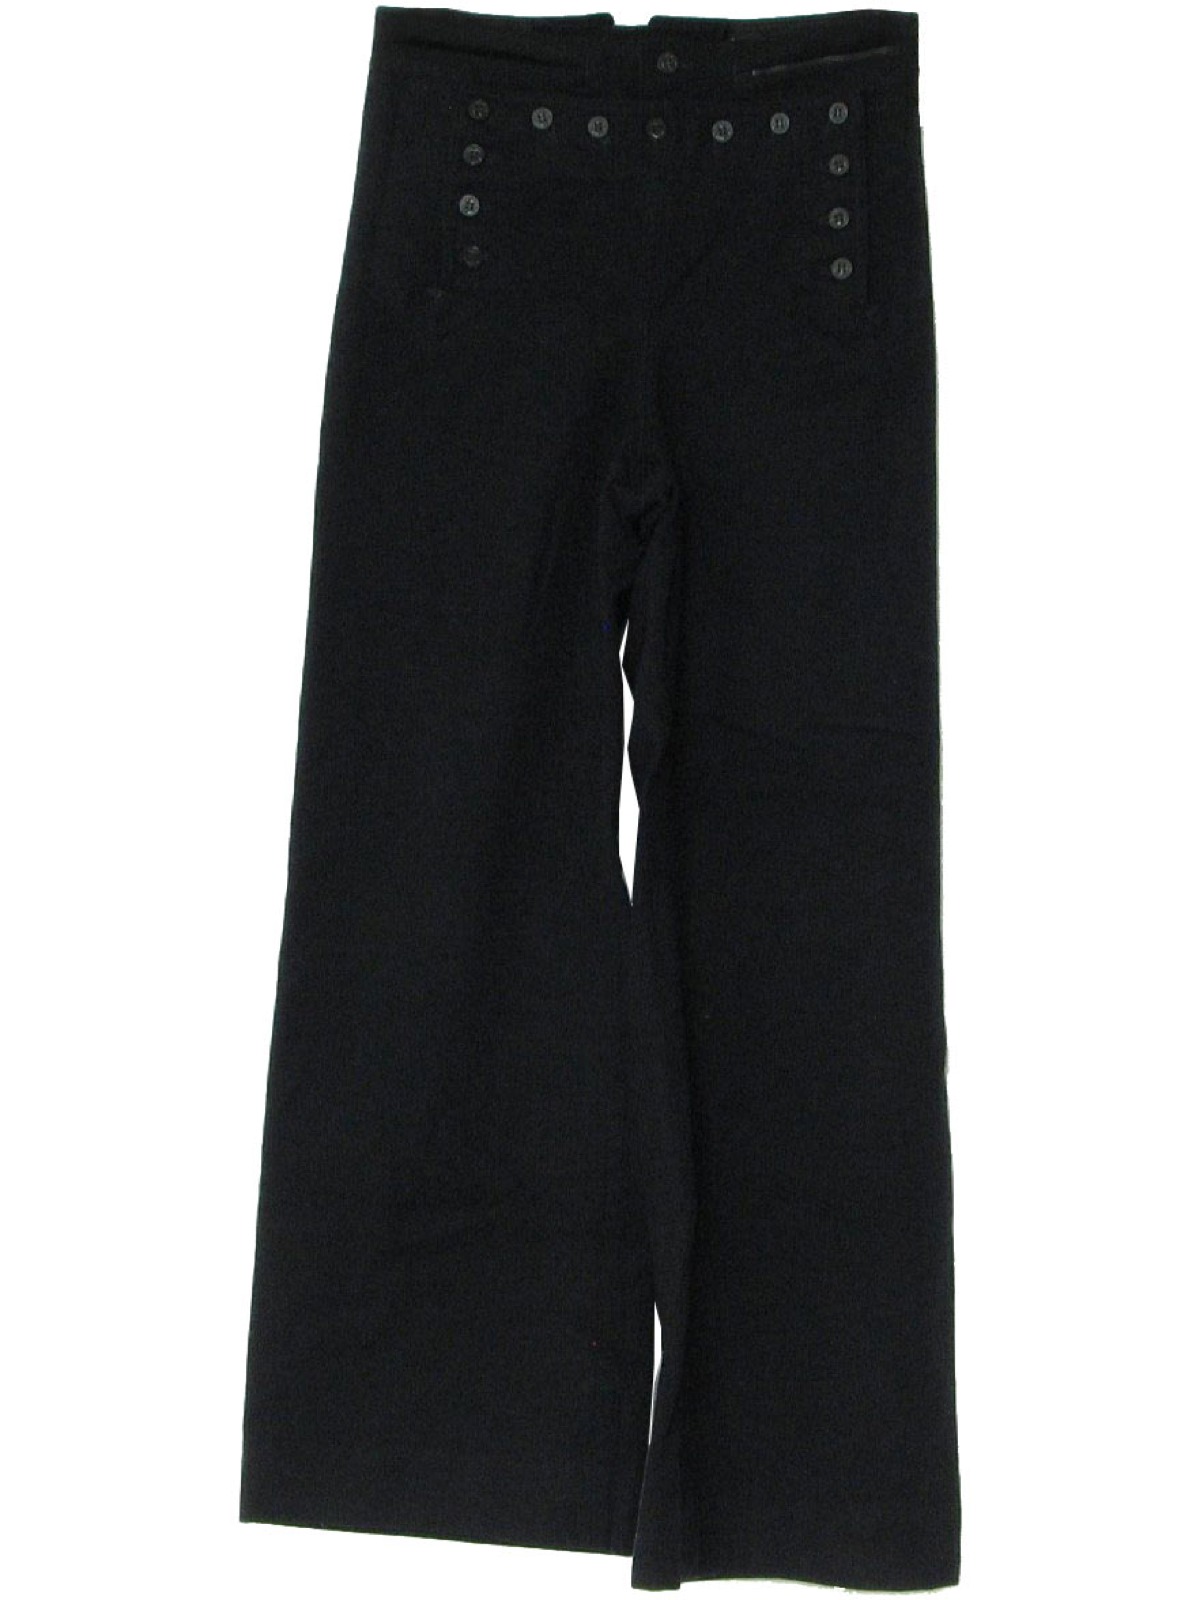 Retro 1960's Bellbottom Pants (Navy Issue) : 60s -Navy Issue- Mens ...